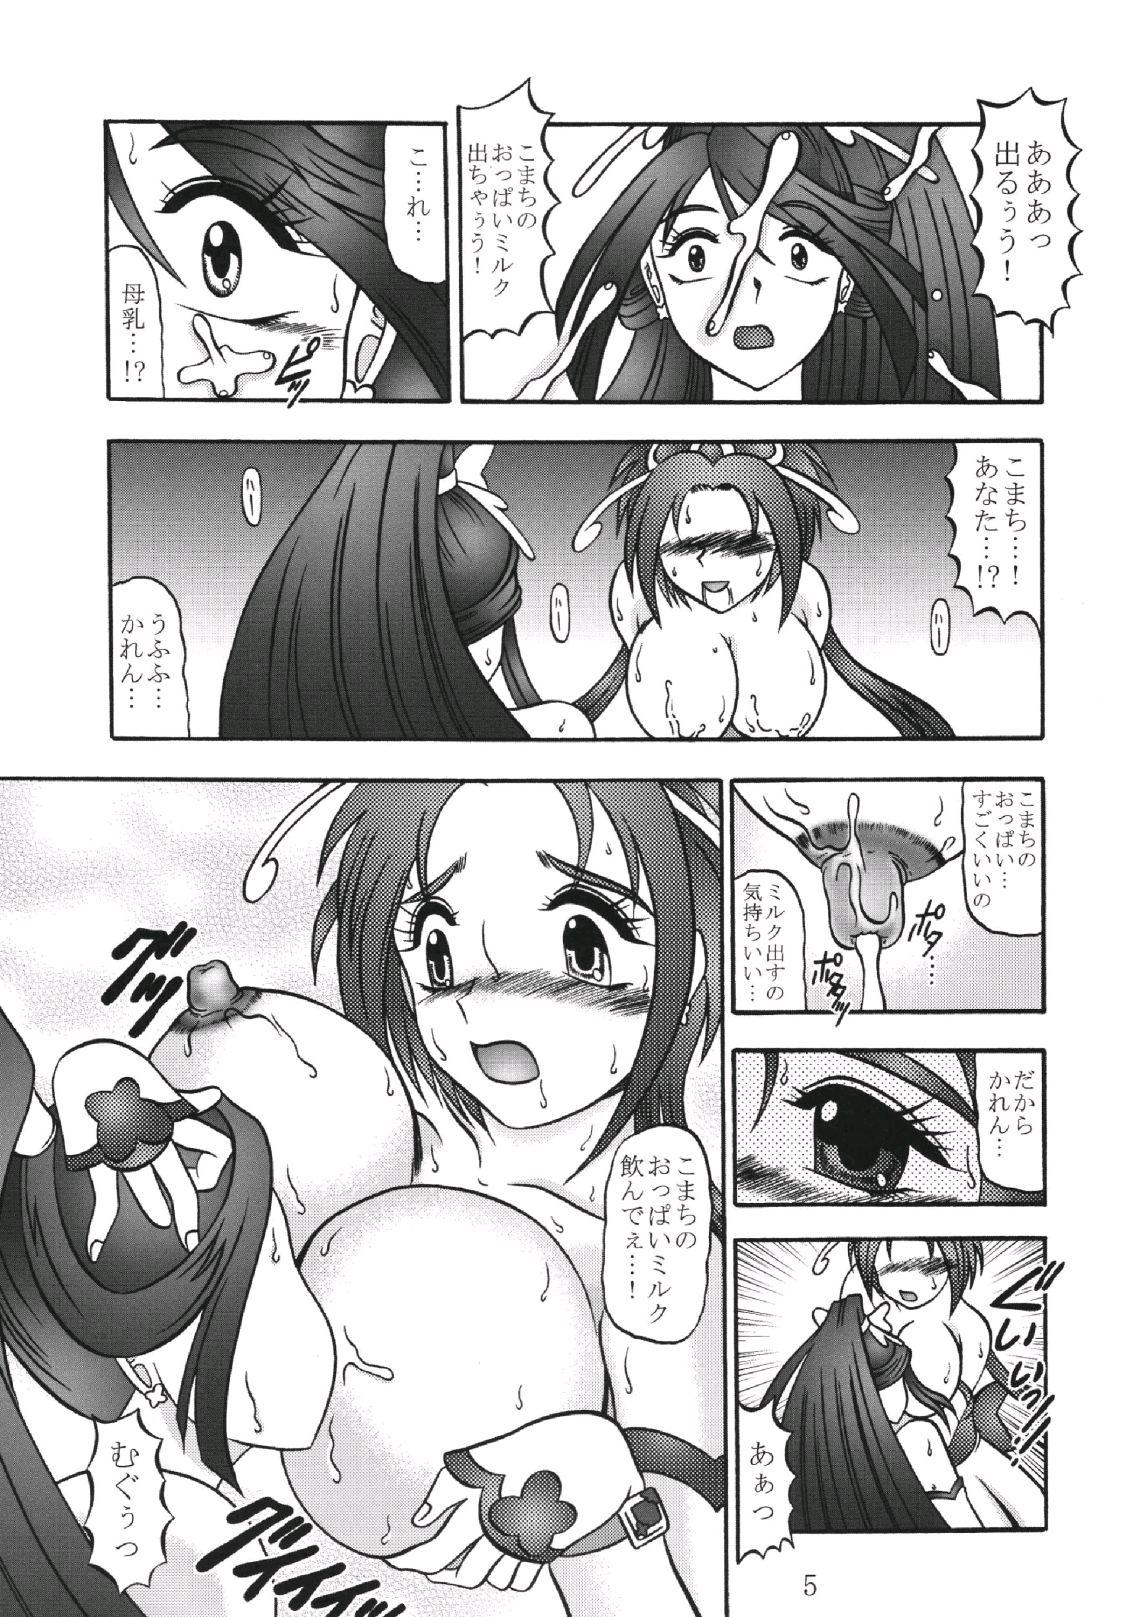 Exgf GREATEST ECLIPSE Kochou Side:B - Yes precure 5 Cock Suckers - Page 5